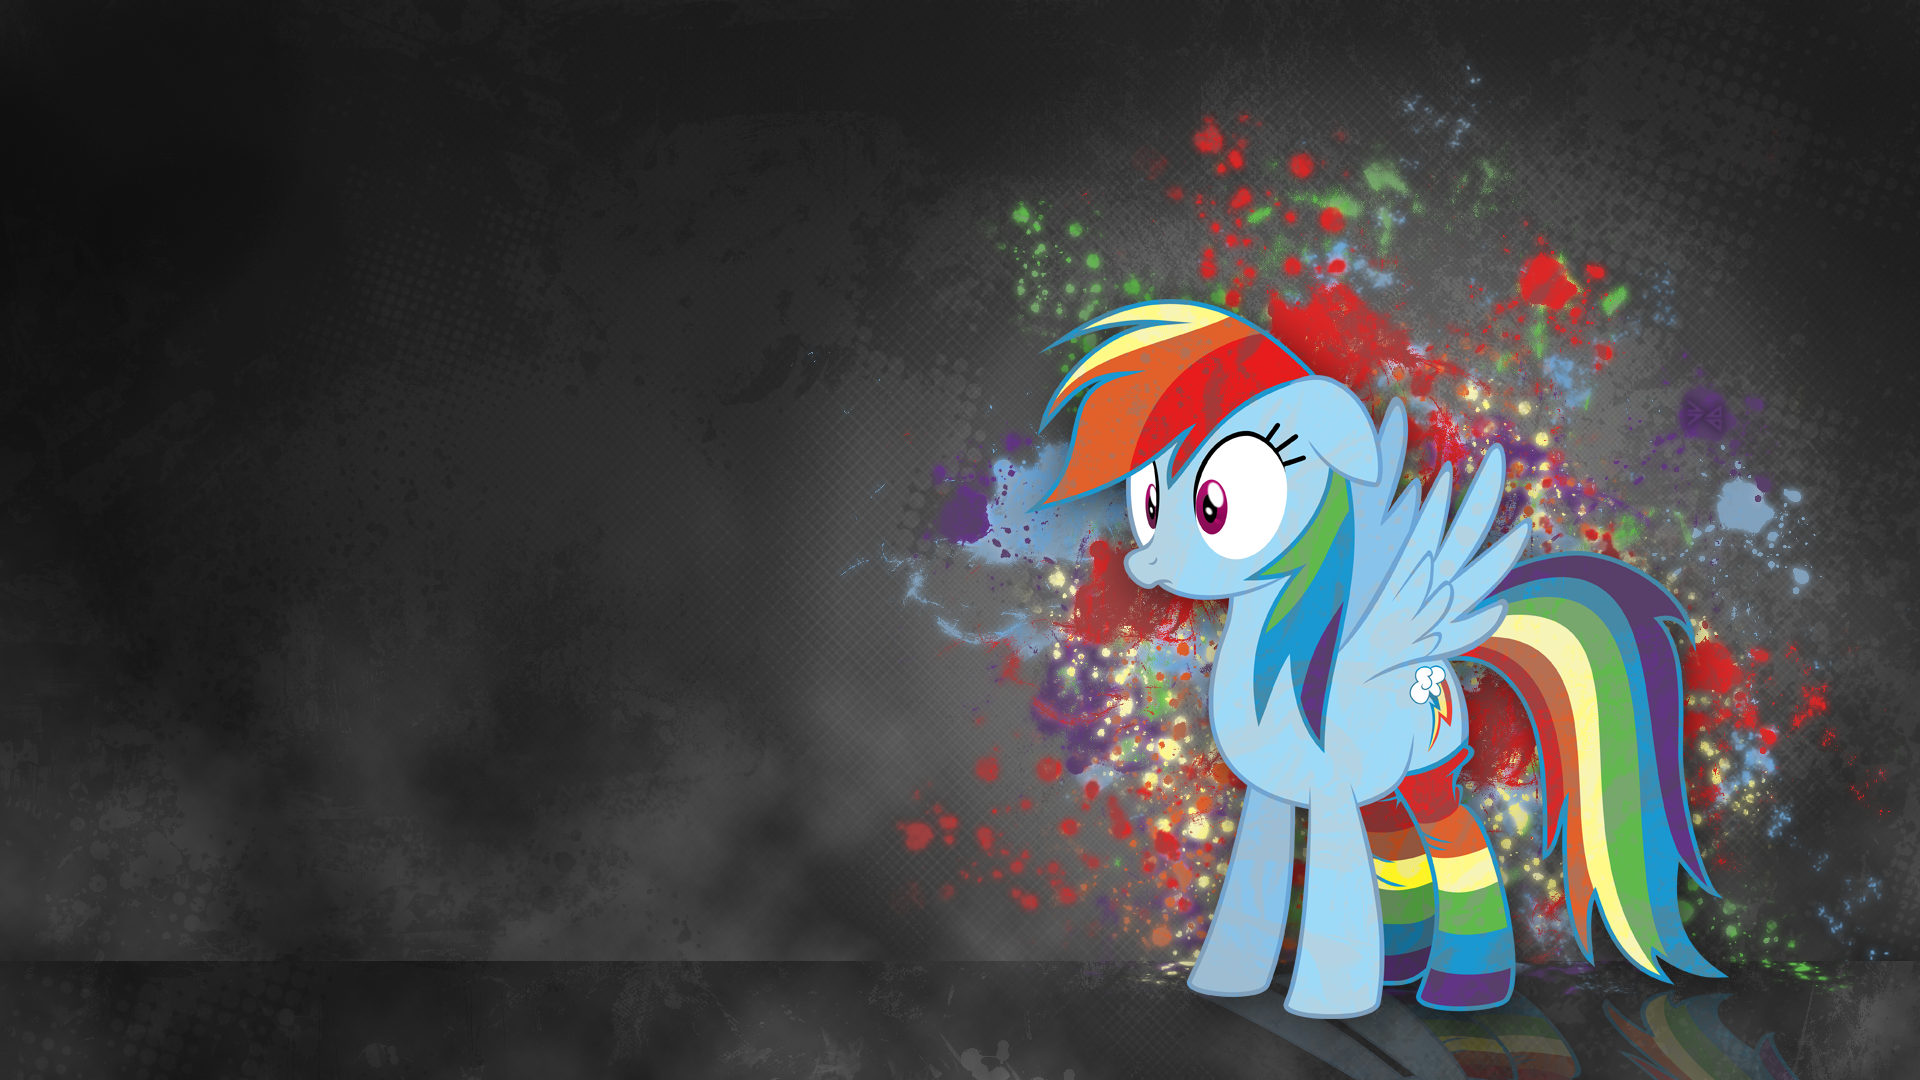 Rainbow 'Splash' by 3ight8it and VoaxmasterSpydre